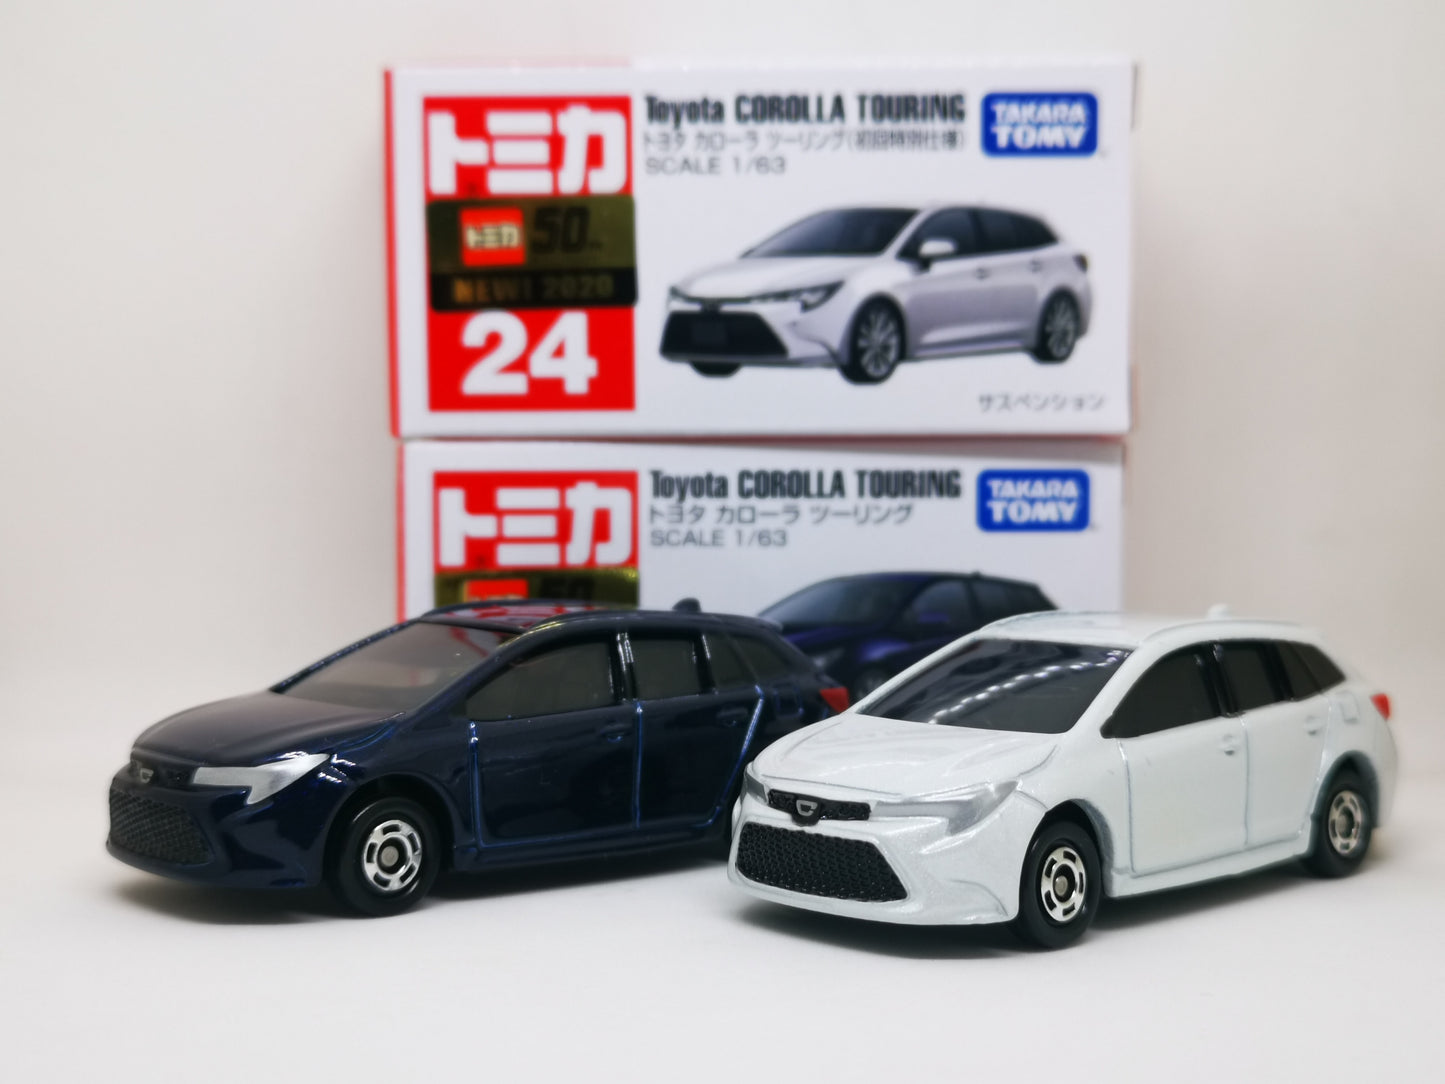 Tomica #24 Toyota Corolla Touring 1/64 SCALE Set of Two